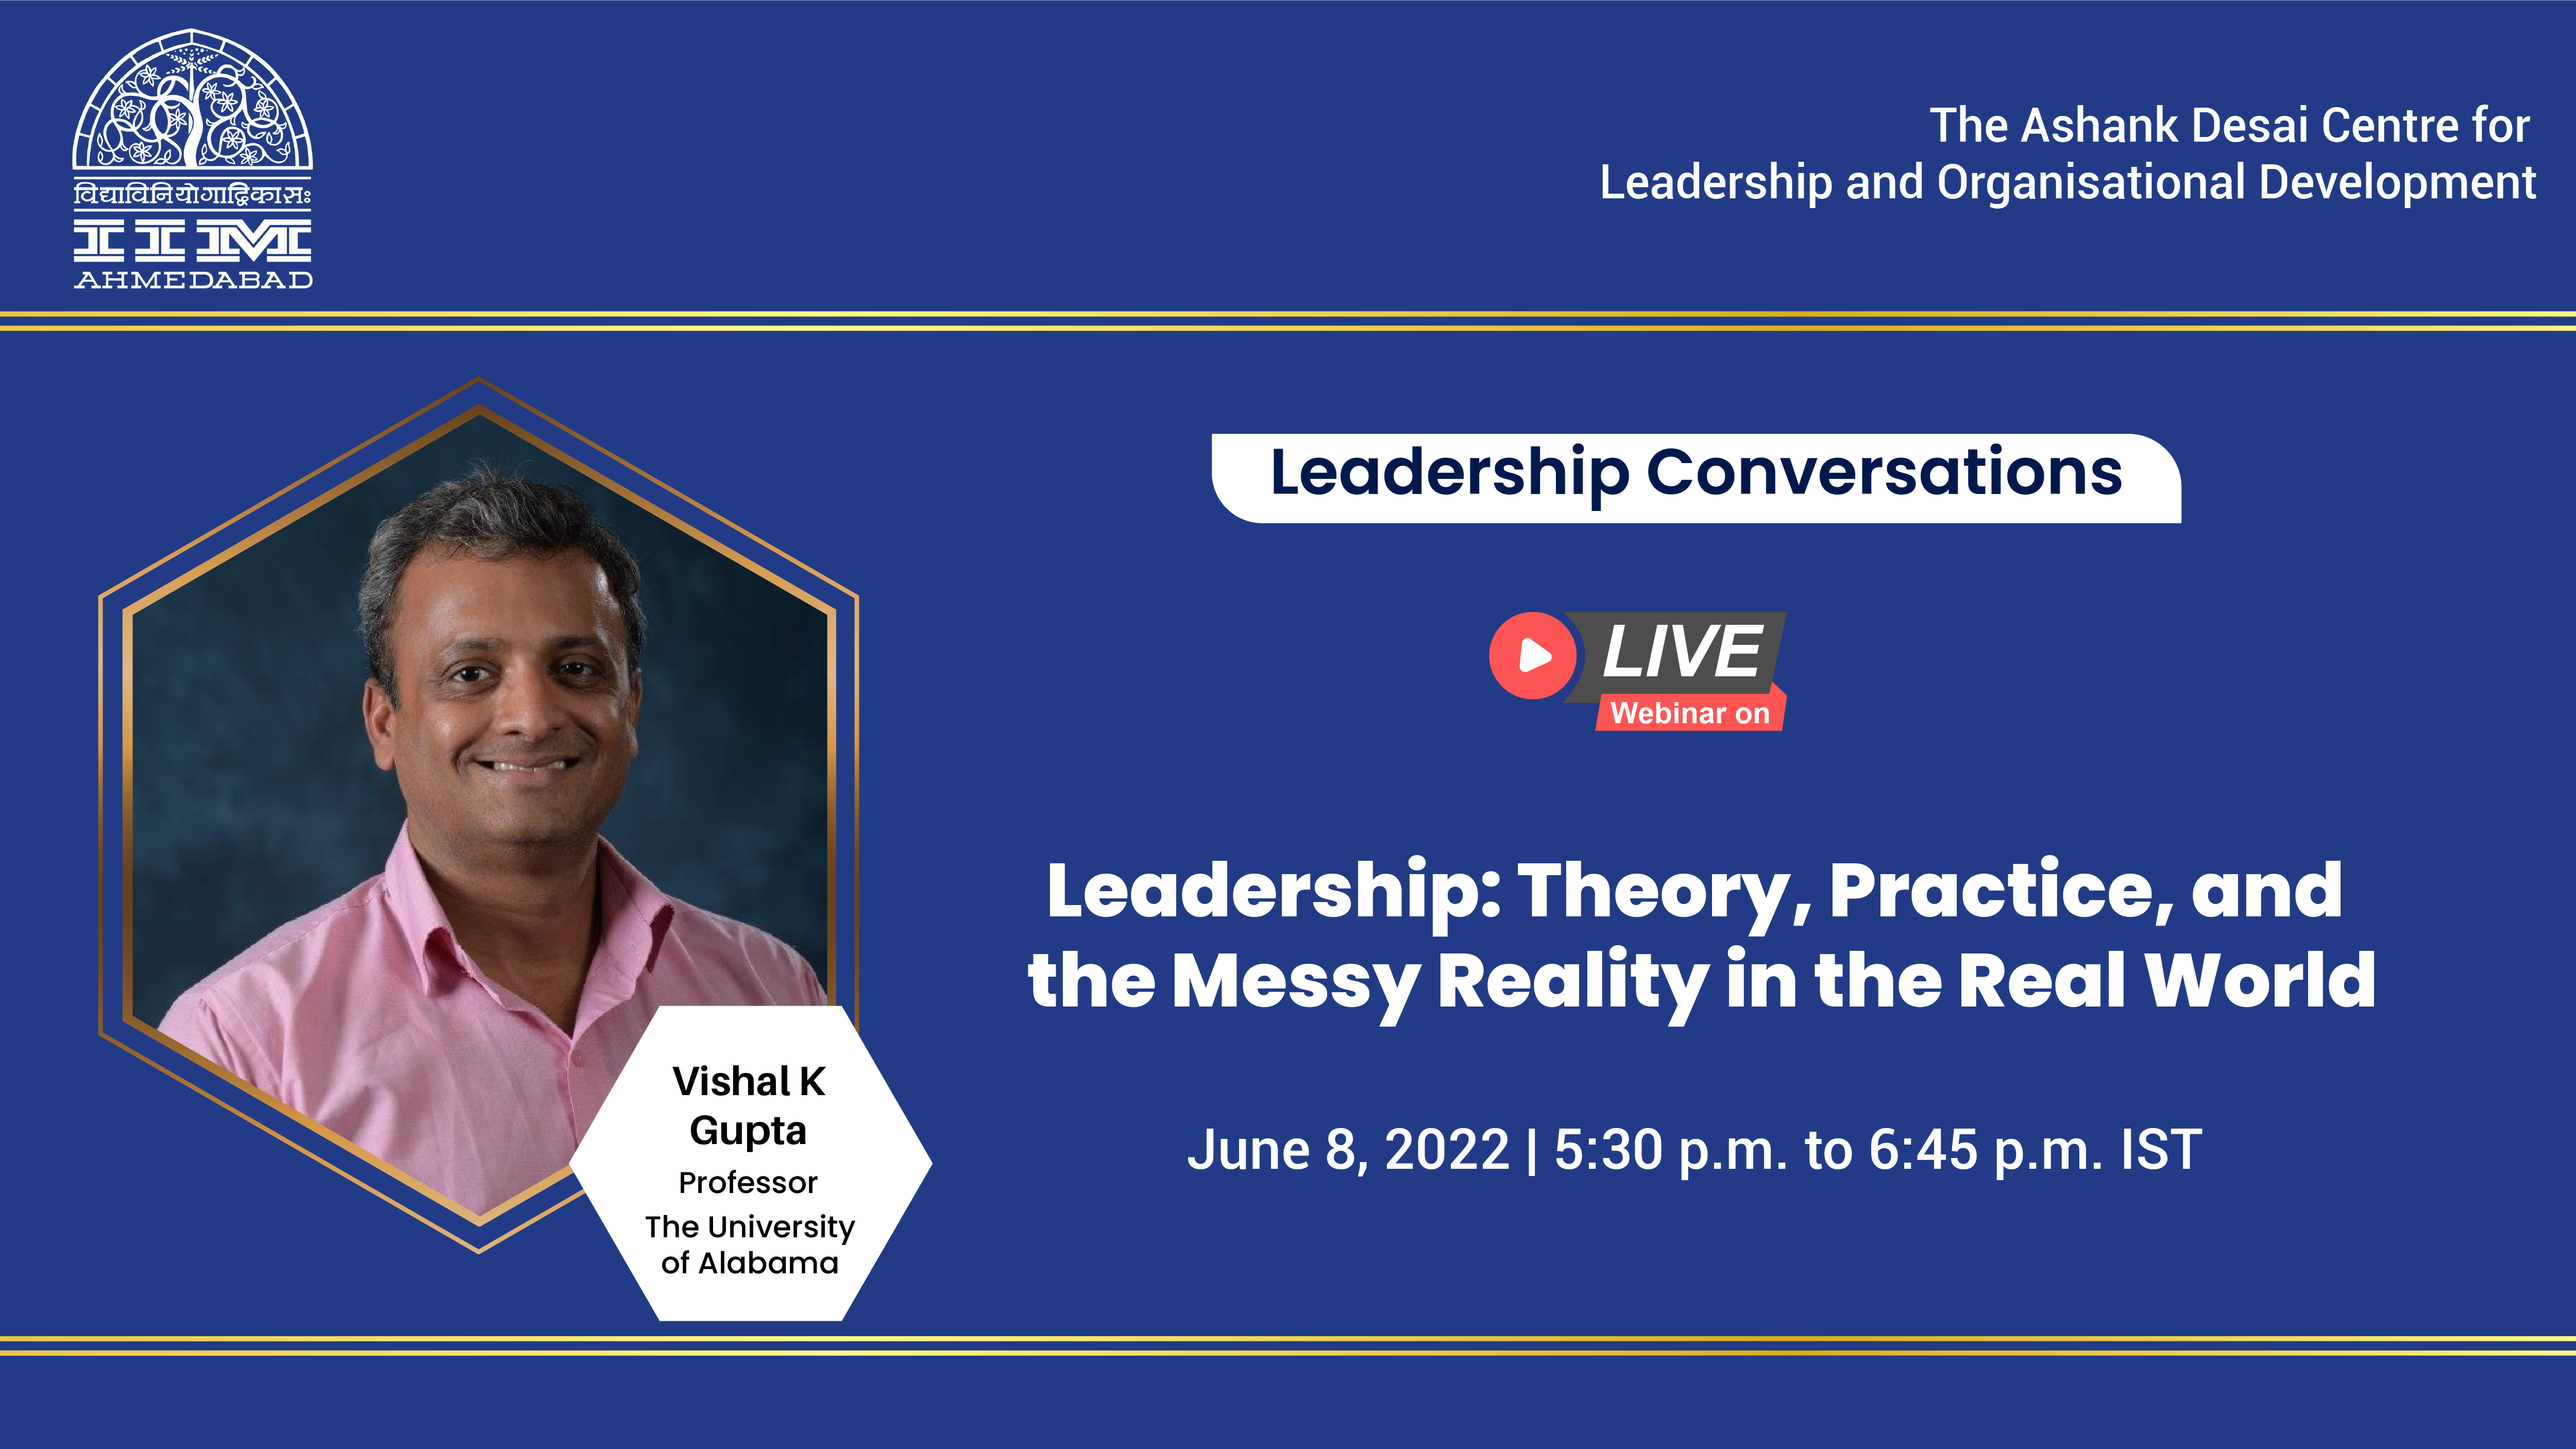 Leadership Conversations on “Leadership: Theory, Practice, and the Messy Reality in the Real World”